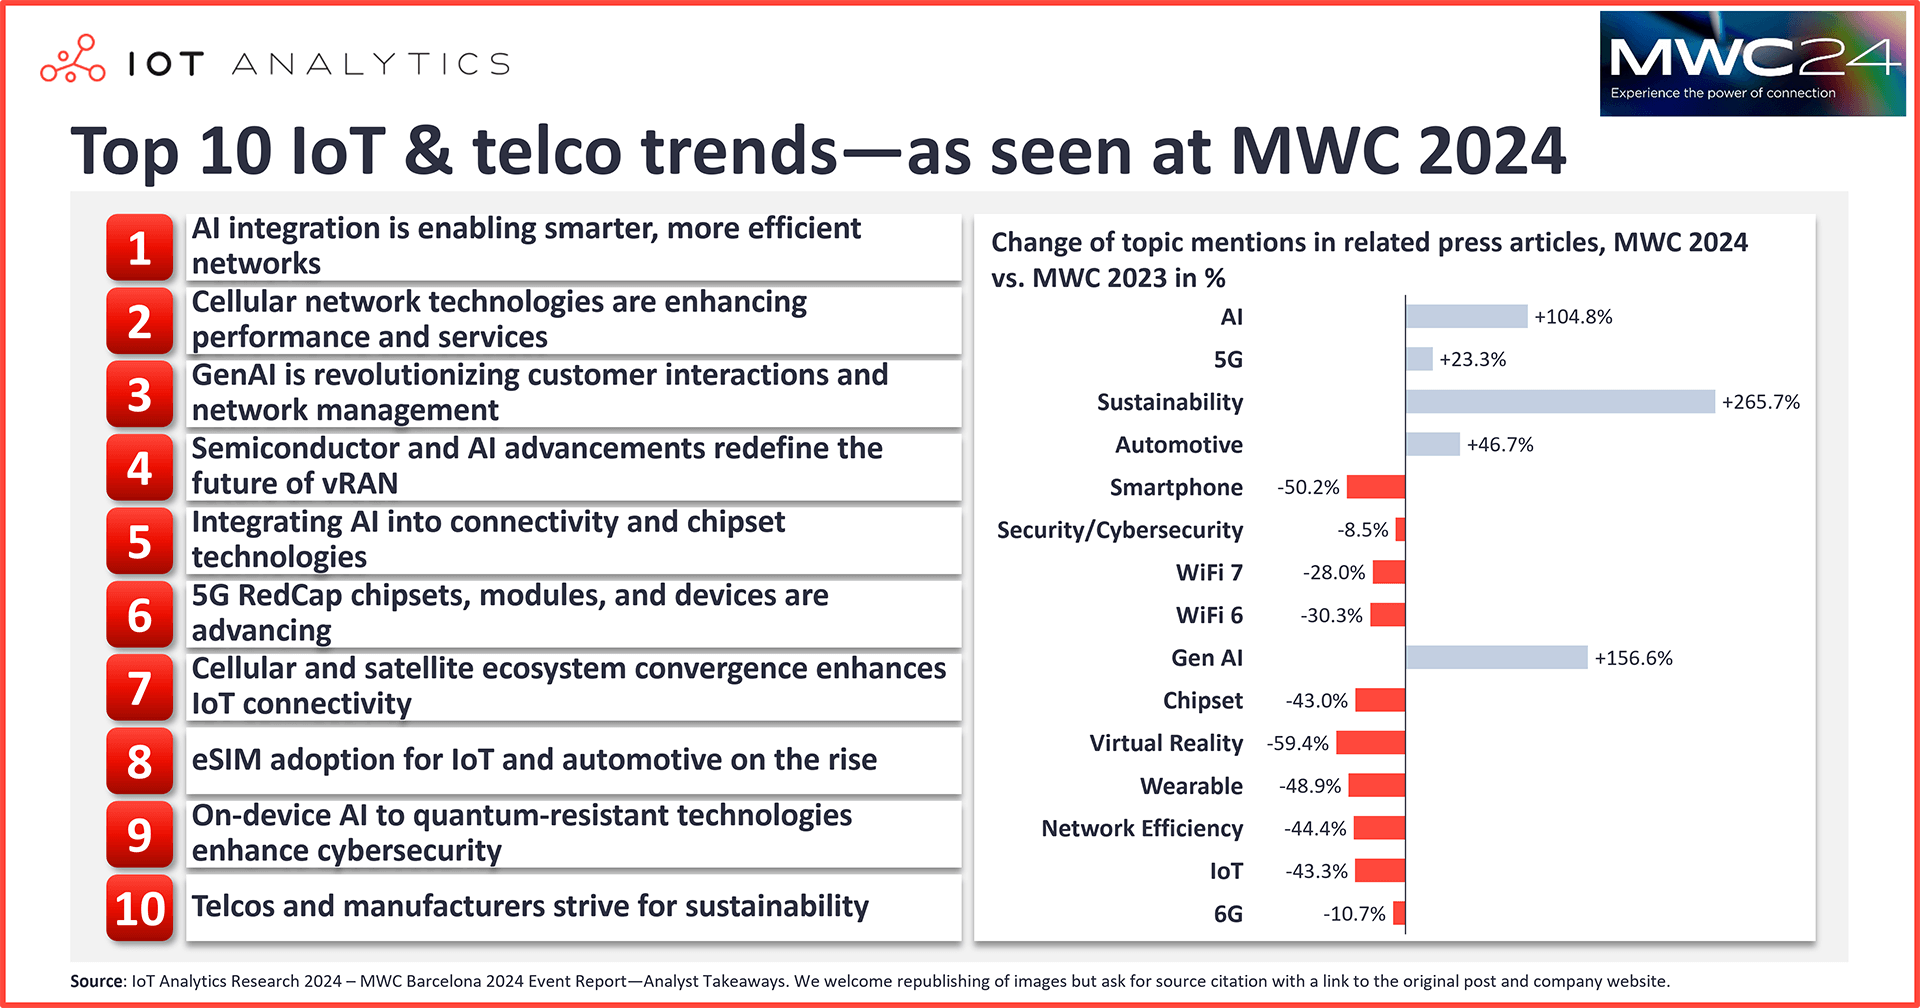 chart: Top 10 IoT and telco trends as seen at MWC 2024